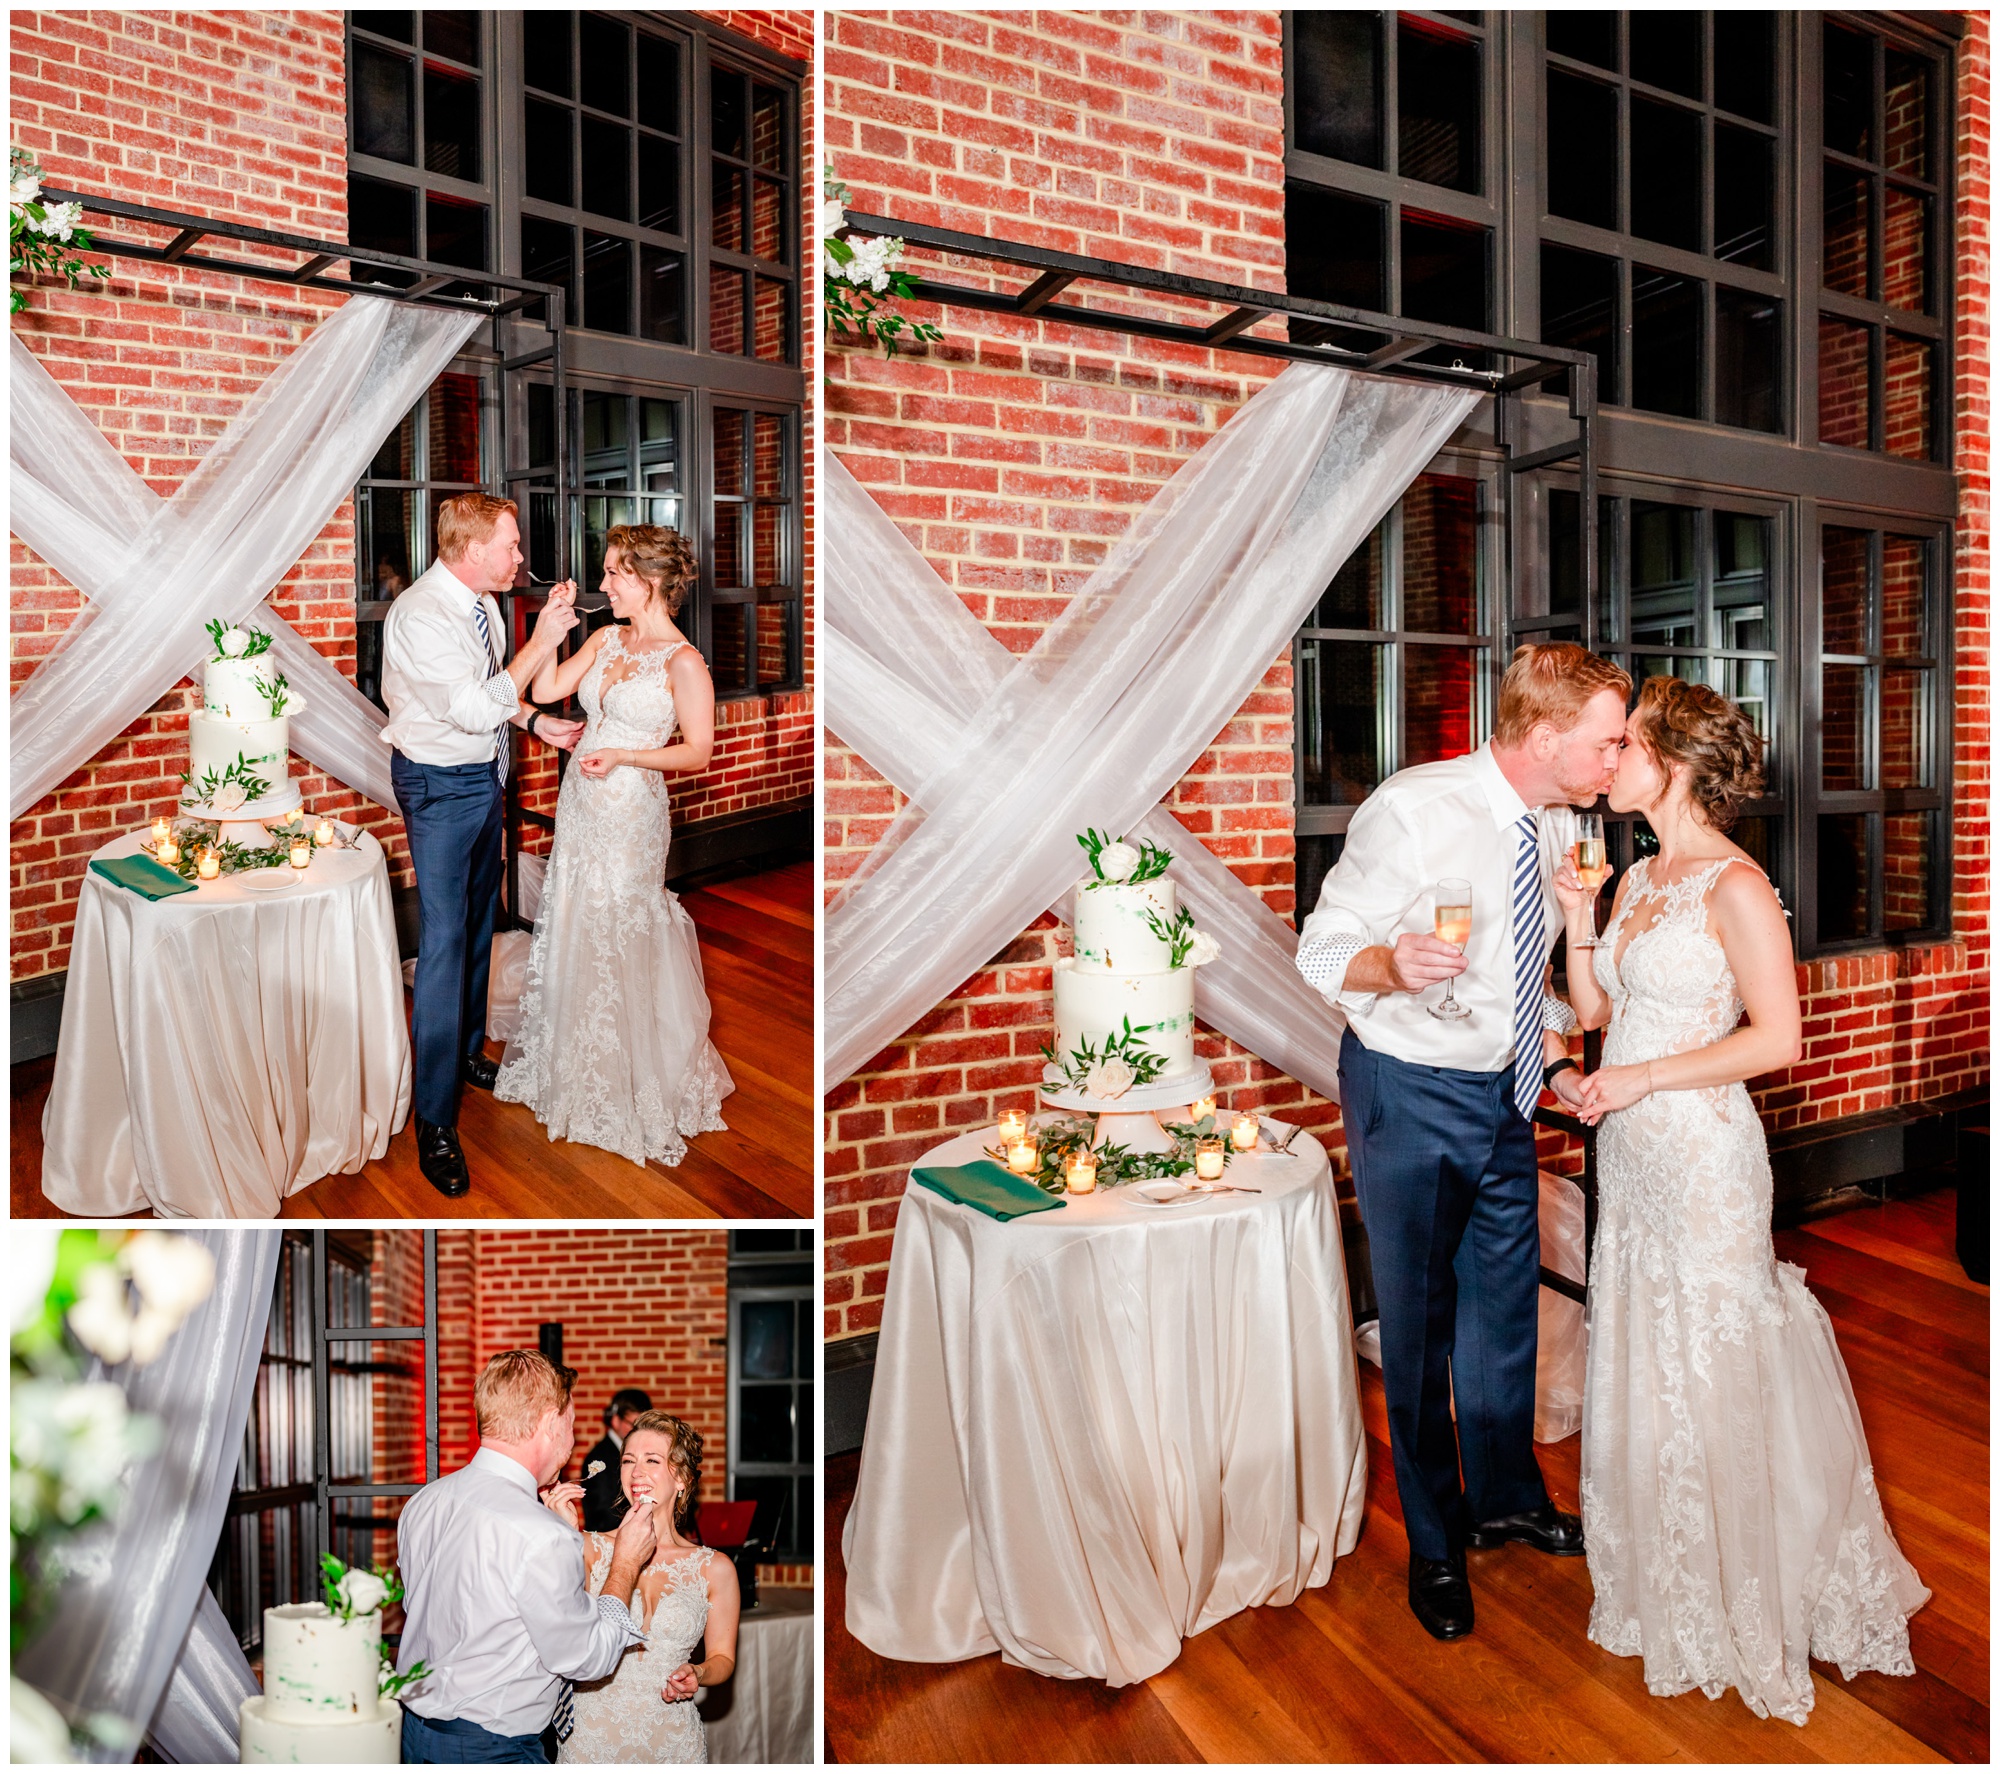 romantic Ritz Carlton Georgetown wedding, summer wedding aesthetic, green and white aesthetic, summer D.C. wedding, D.C. wedding venues, Ritz Carlton wedding, Washington D.C. wedding, romantic wedding aesthetic, Georgetown wedding, Rachel E.H. Photography, D.C. photographer, bride and groom eating wedding cake, bride and groom with cake, wedding cake